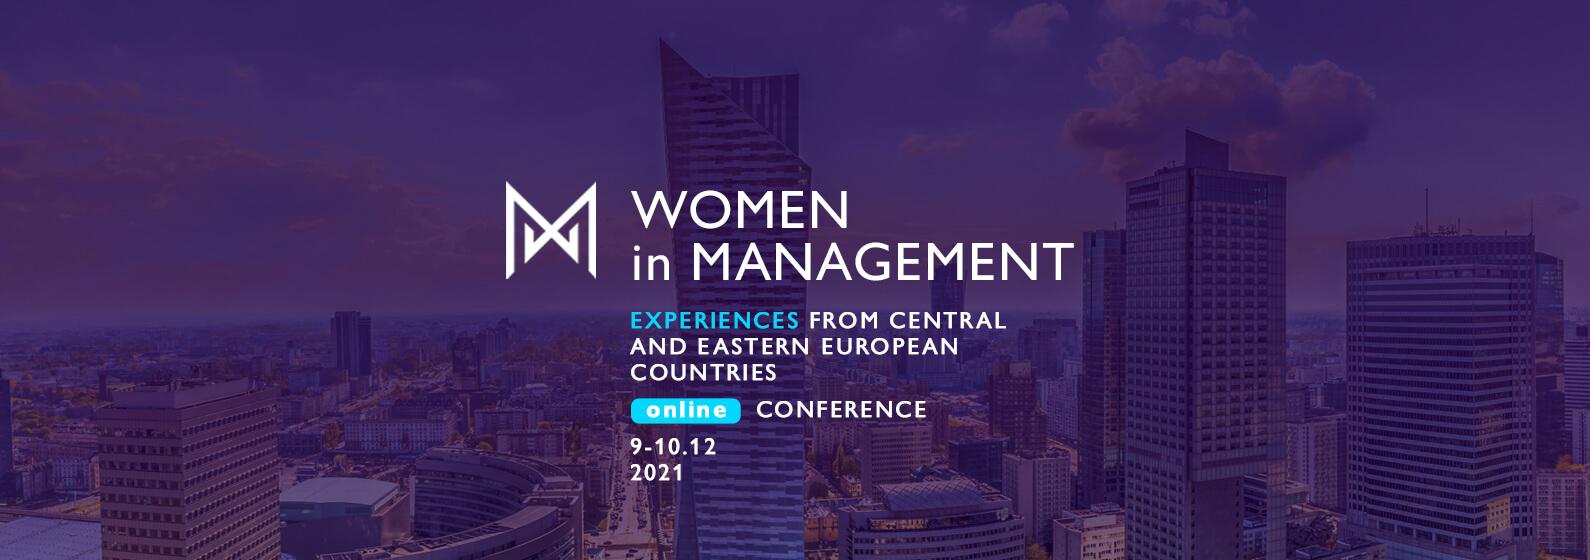 Women in Management-Experiences from Central and Eastern European Countries - www news _01.jpg